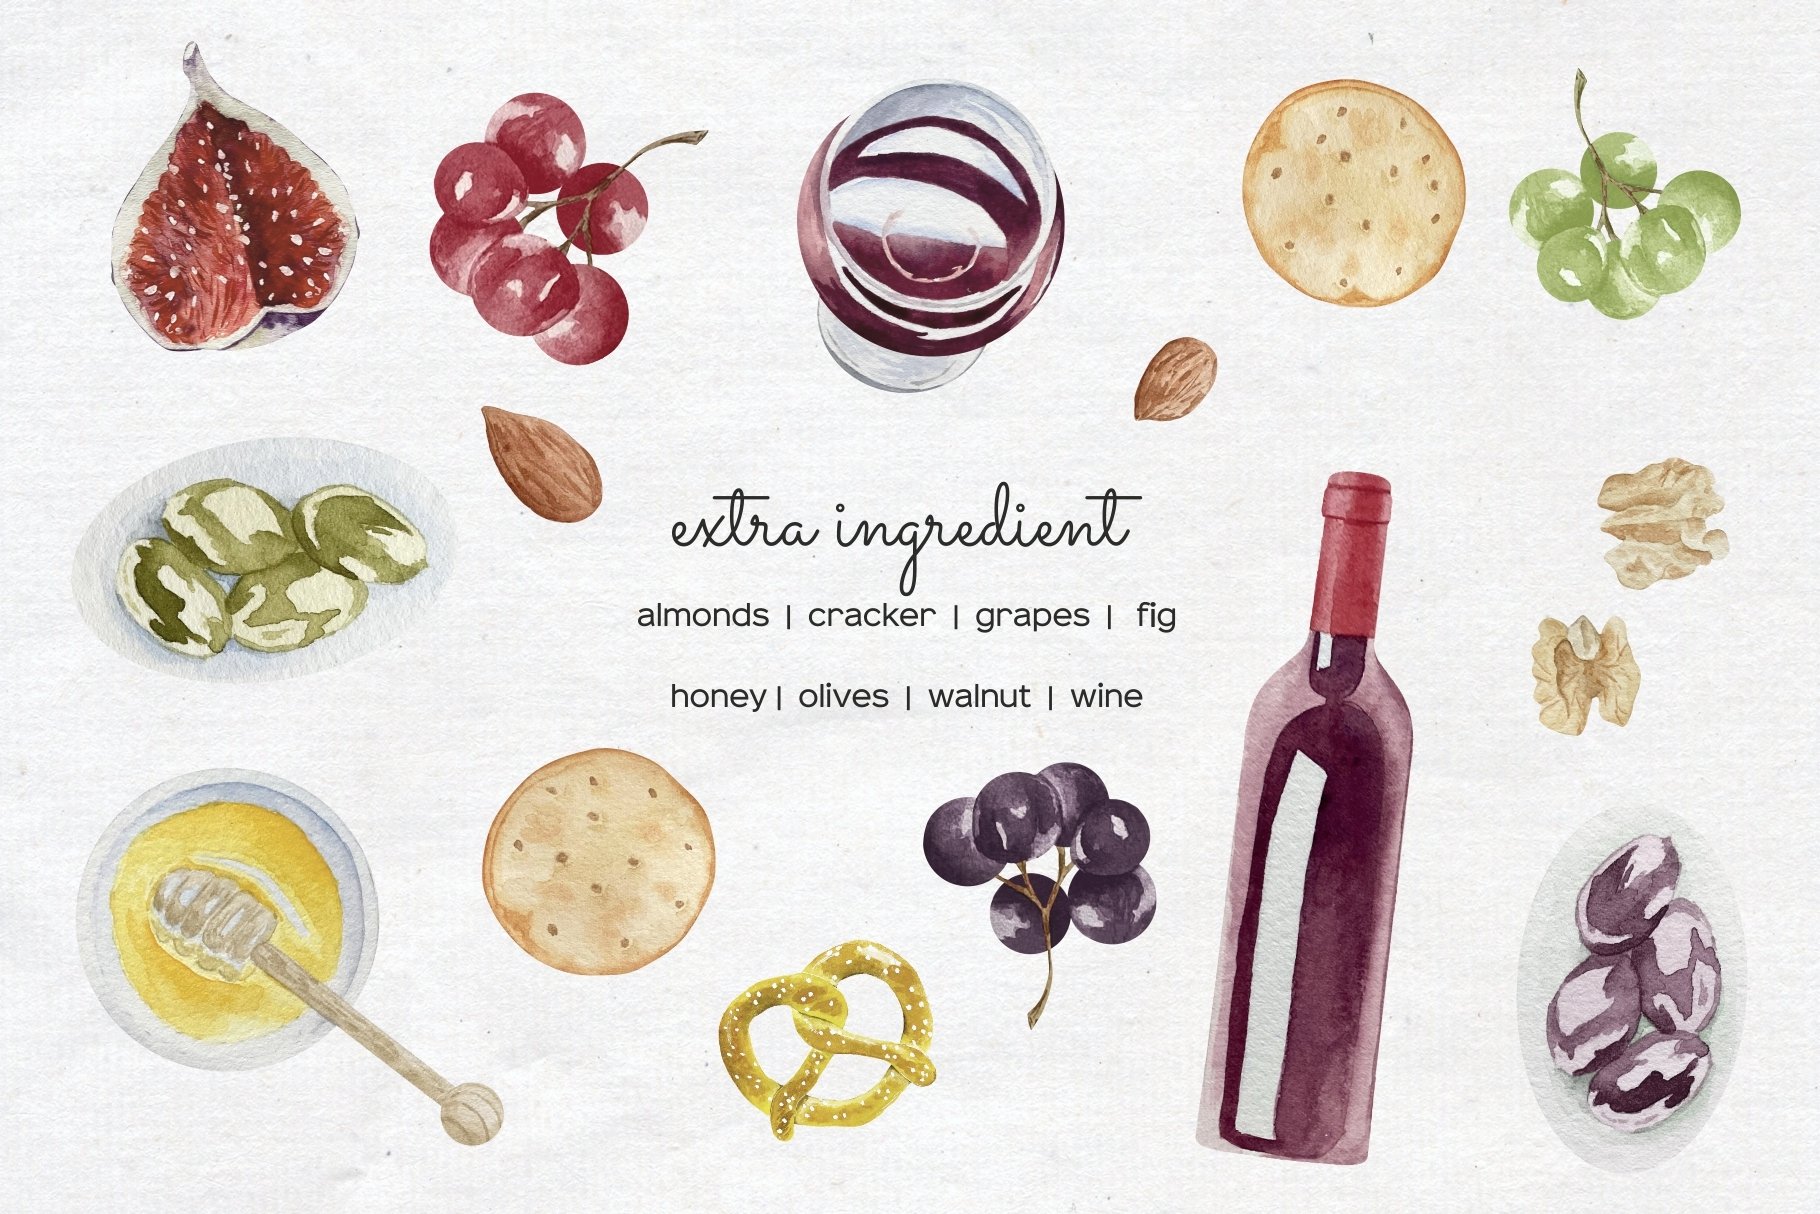 A selection of delightful images of a glass of wine, fruit, snacks.